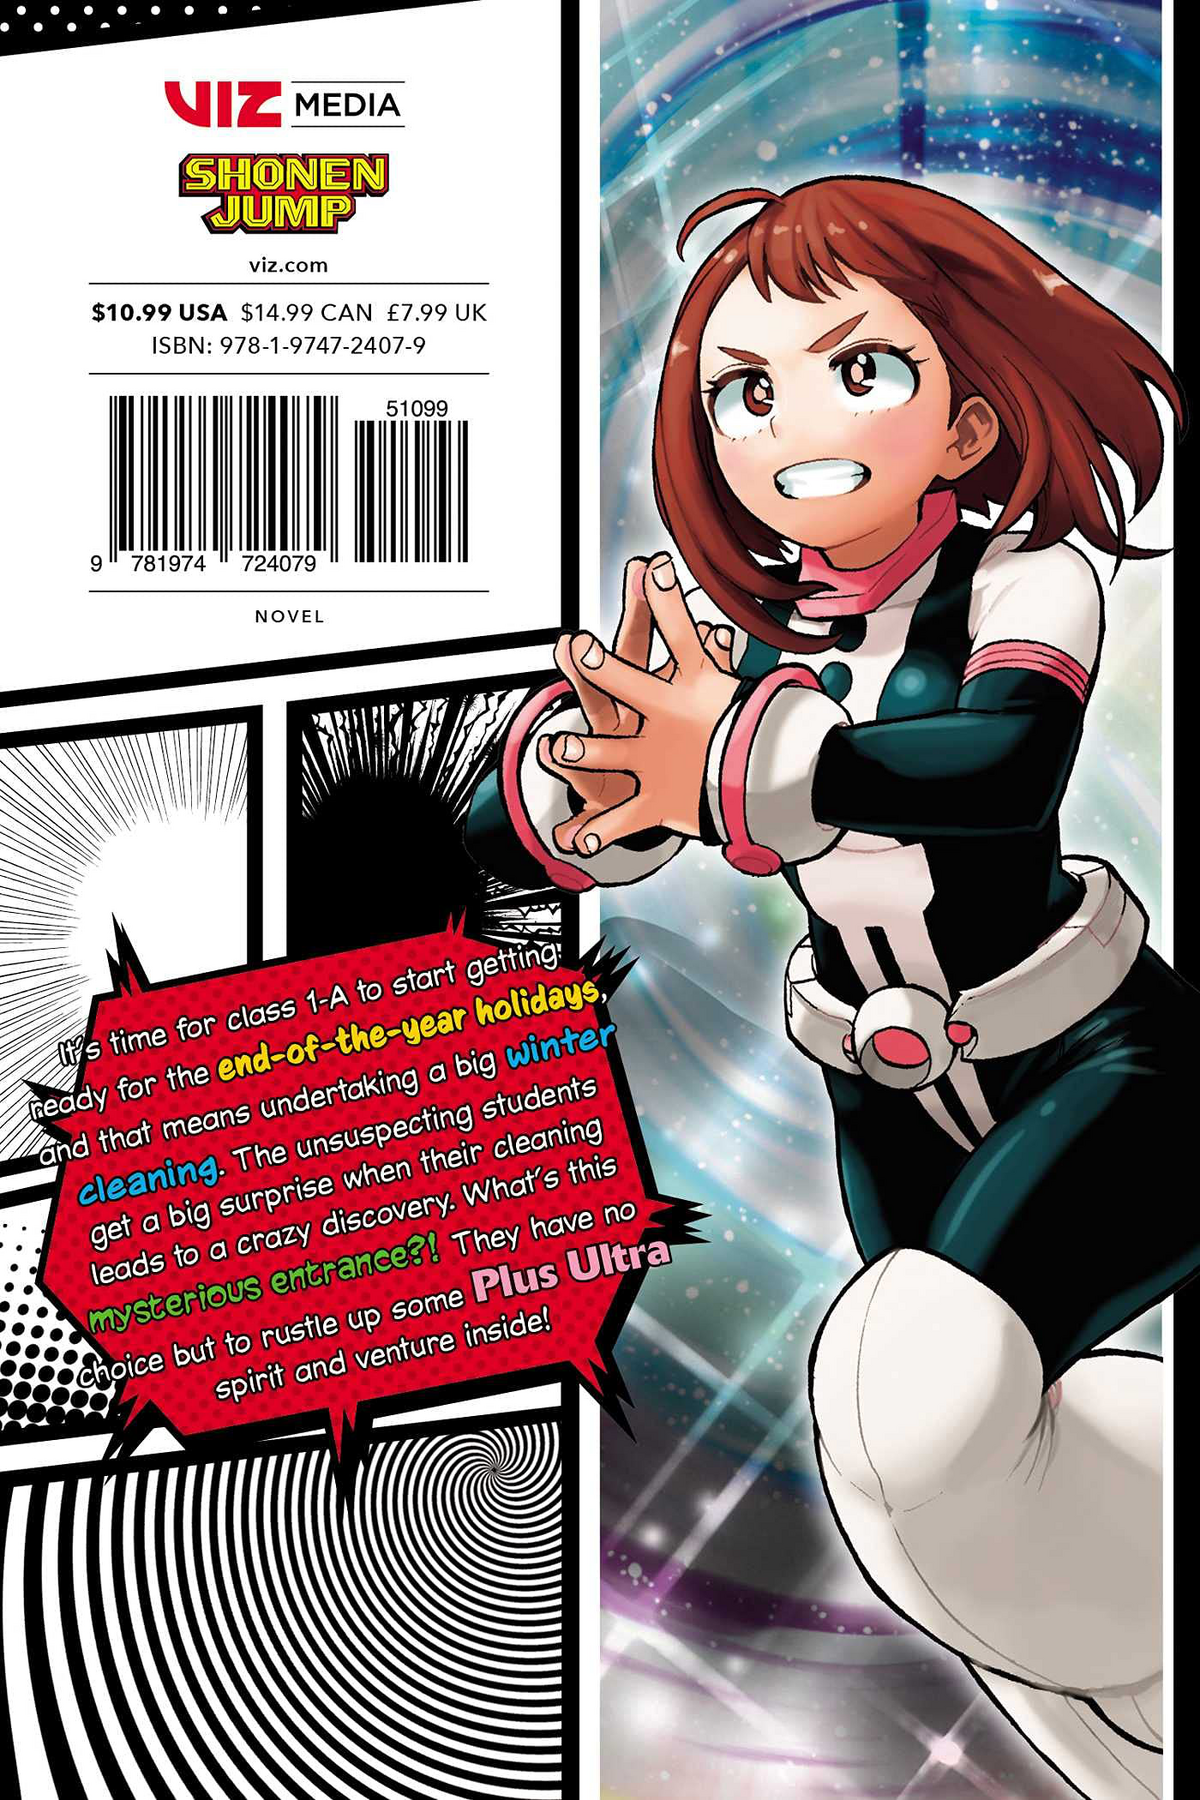 My Hero Academia: Season 5 – I've gone and become the “read the